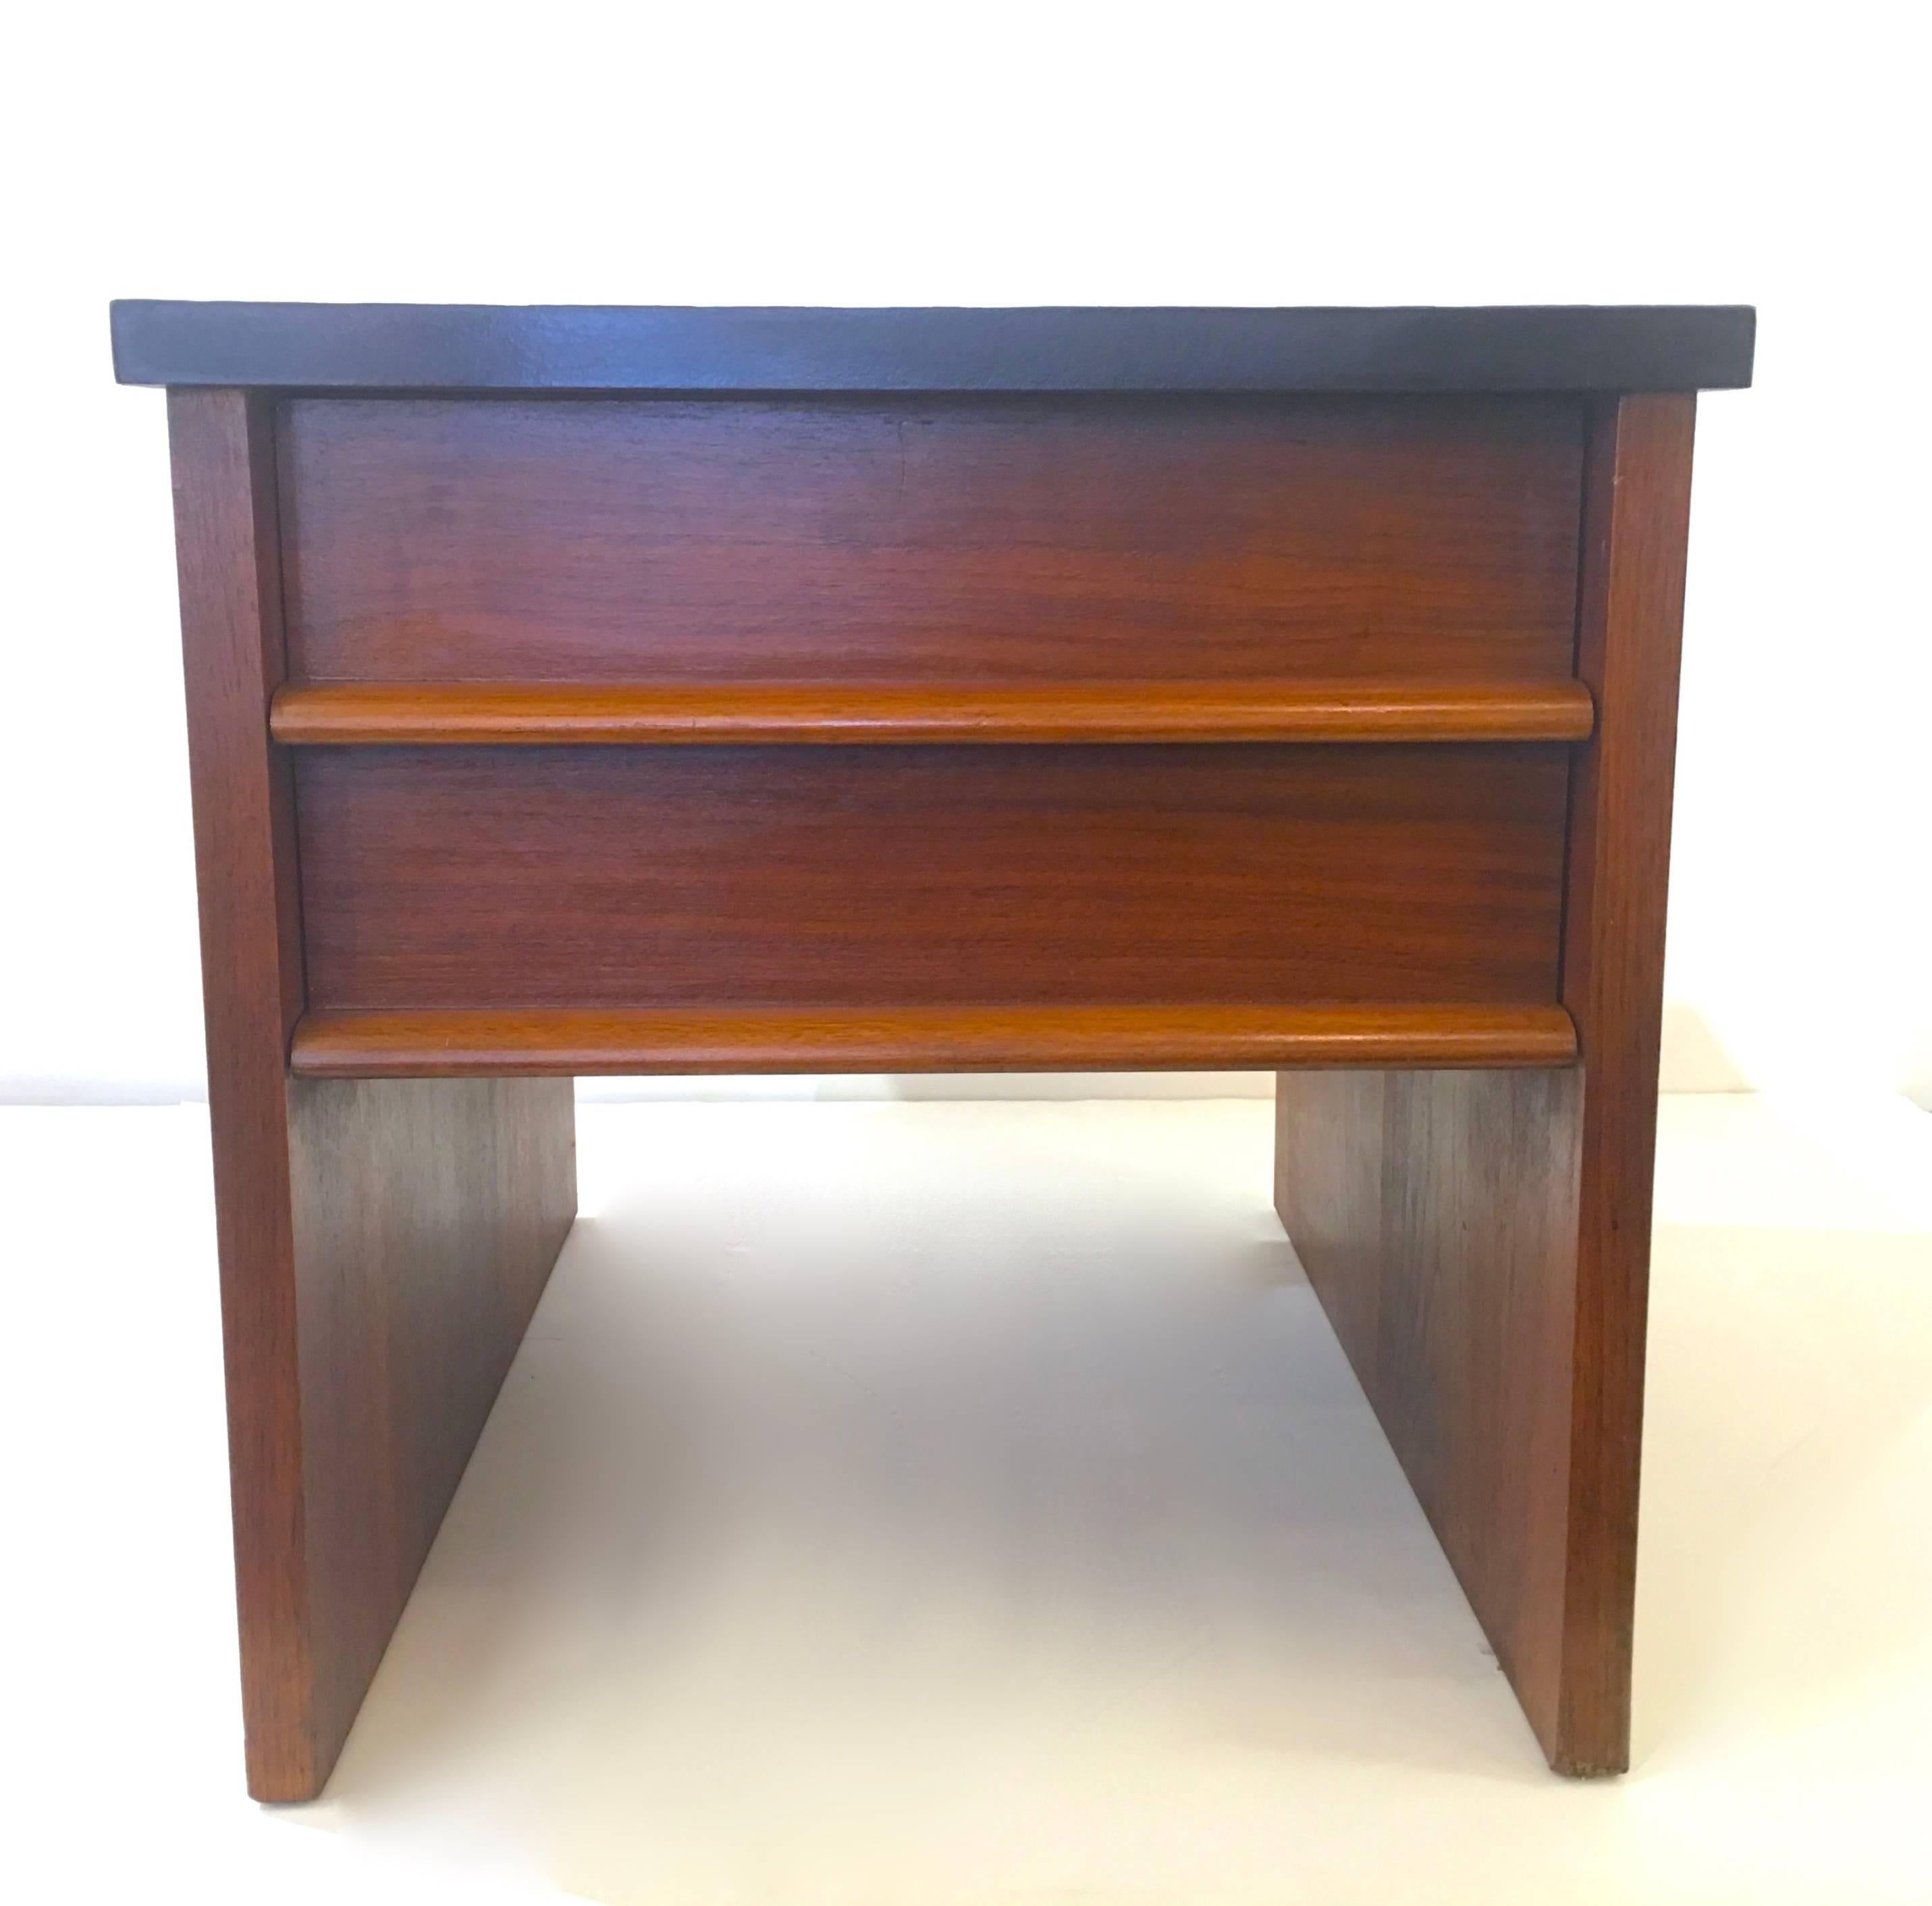 Handsome pair of nightstands in walnut with a faux stone top. The tops of the stands seems to be a textured laminate resembling slate. Please contact for location. 